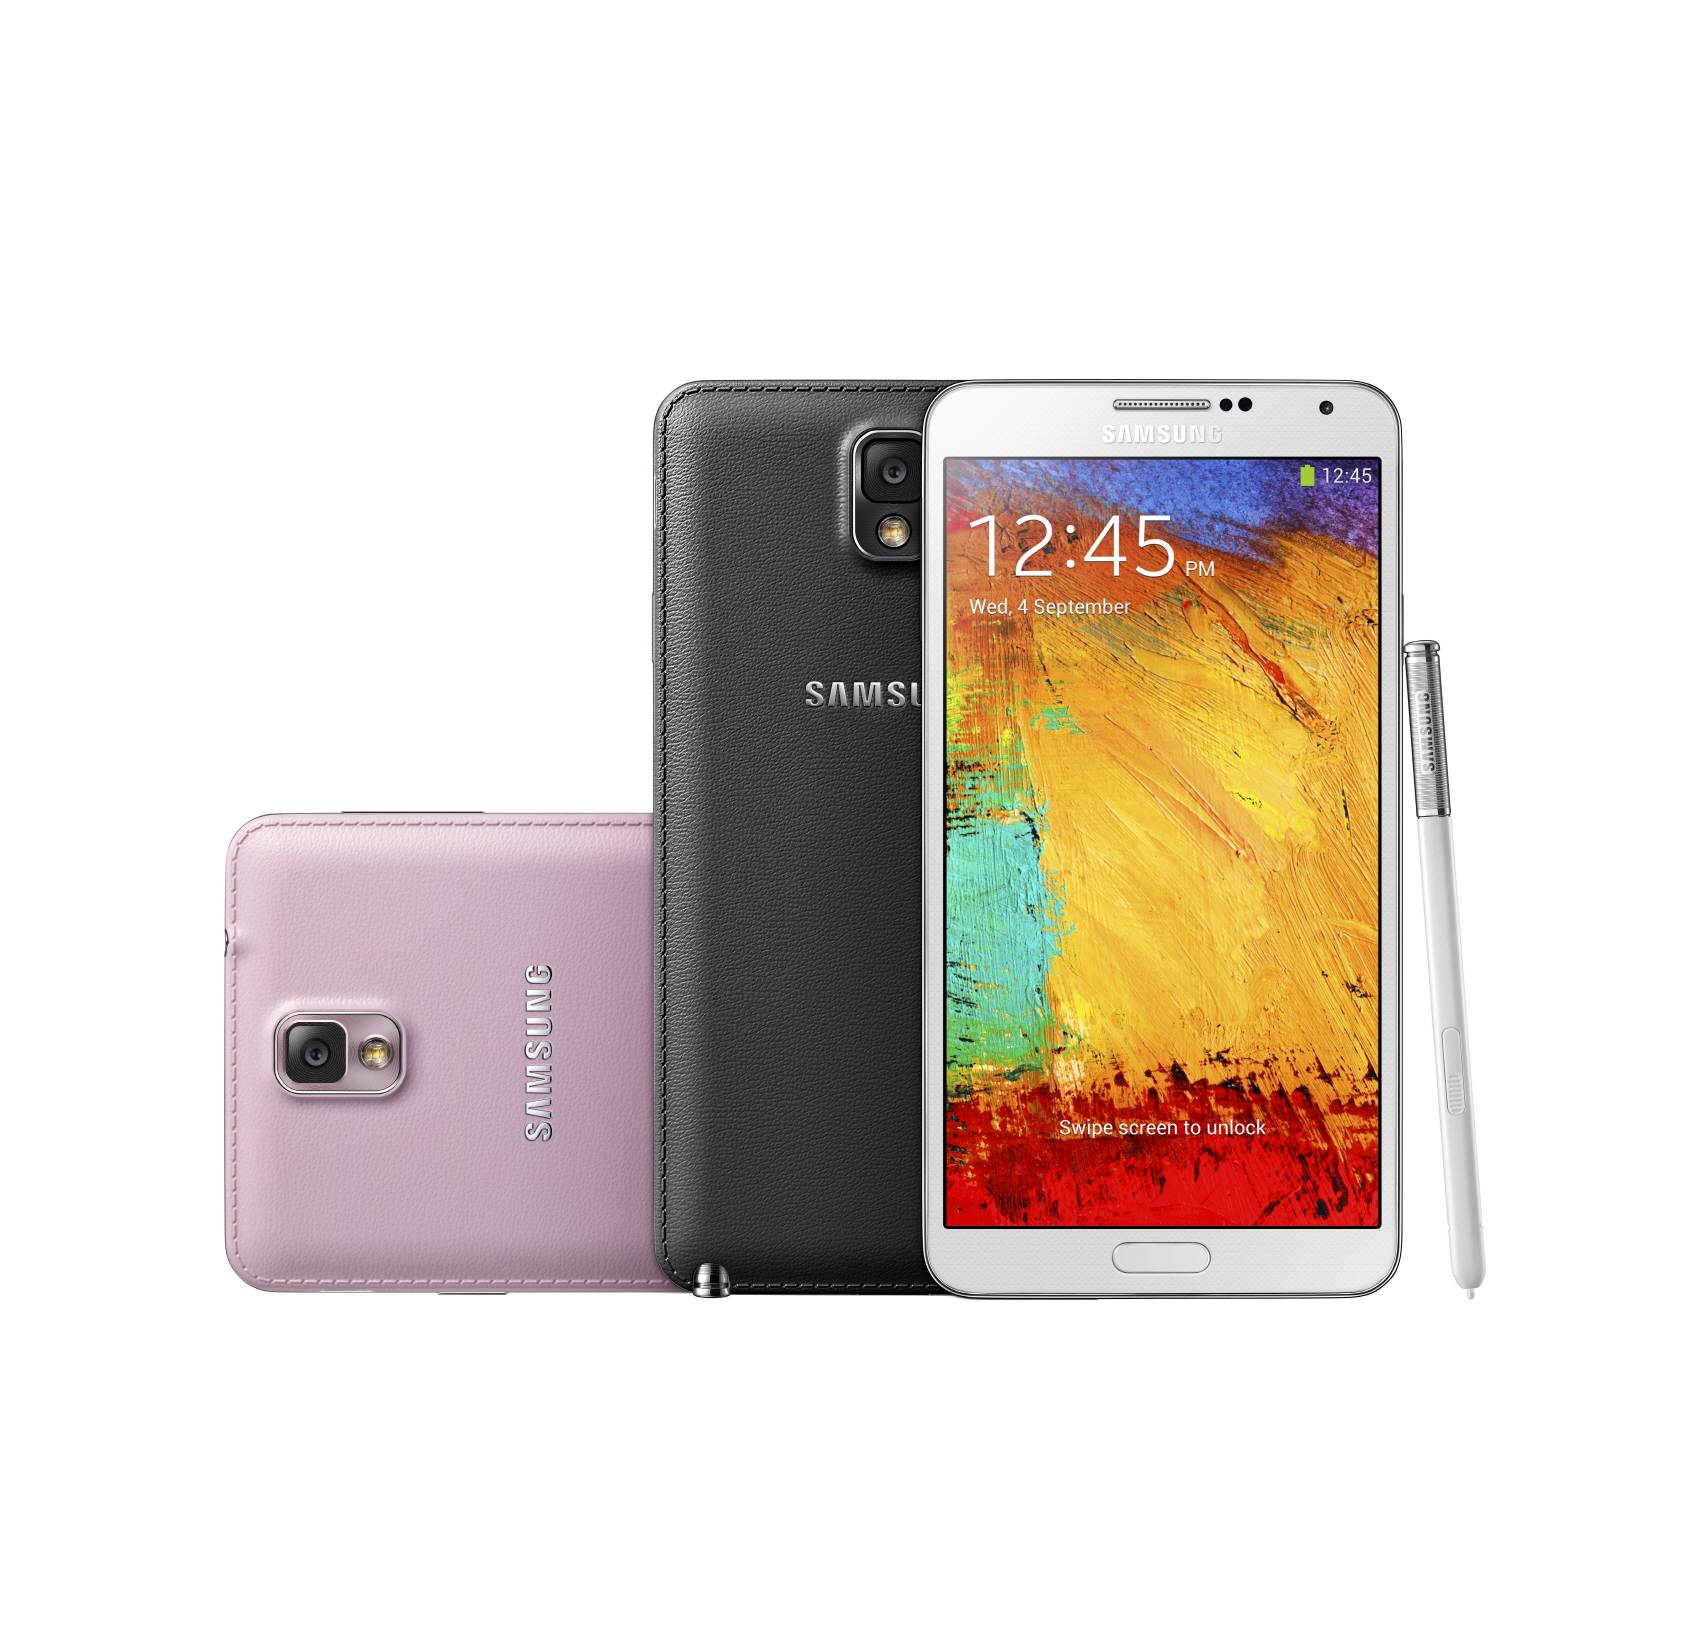 Samsung-Galaxy-Note-3-enters-the-phablet-ring